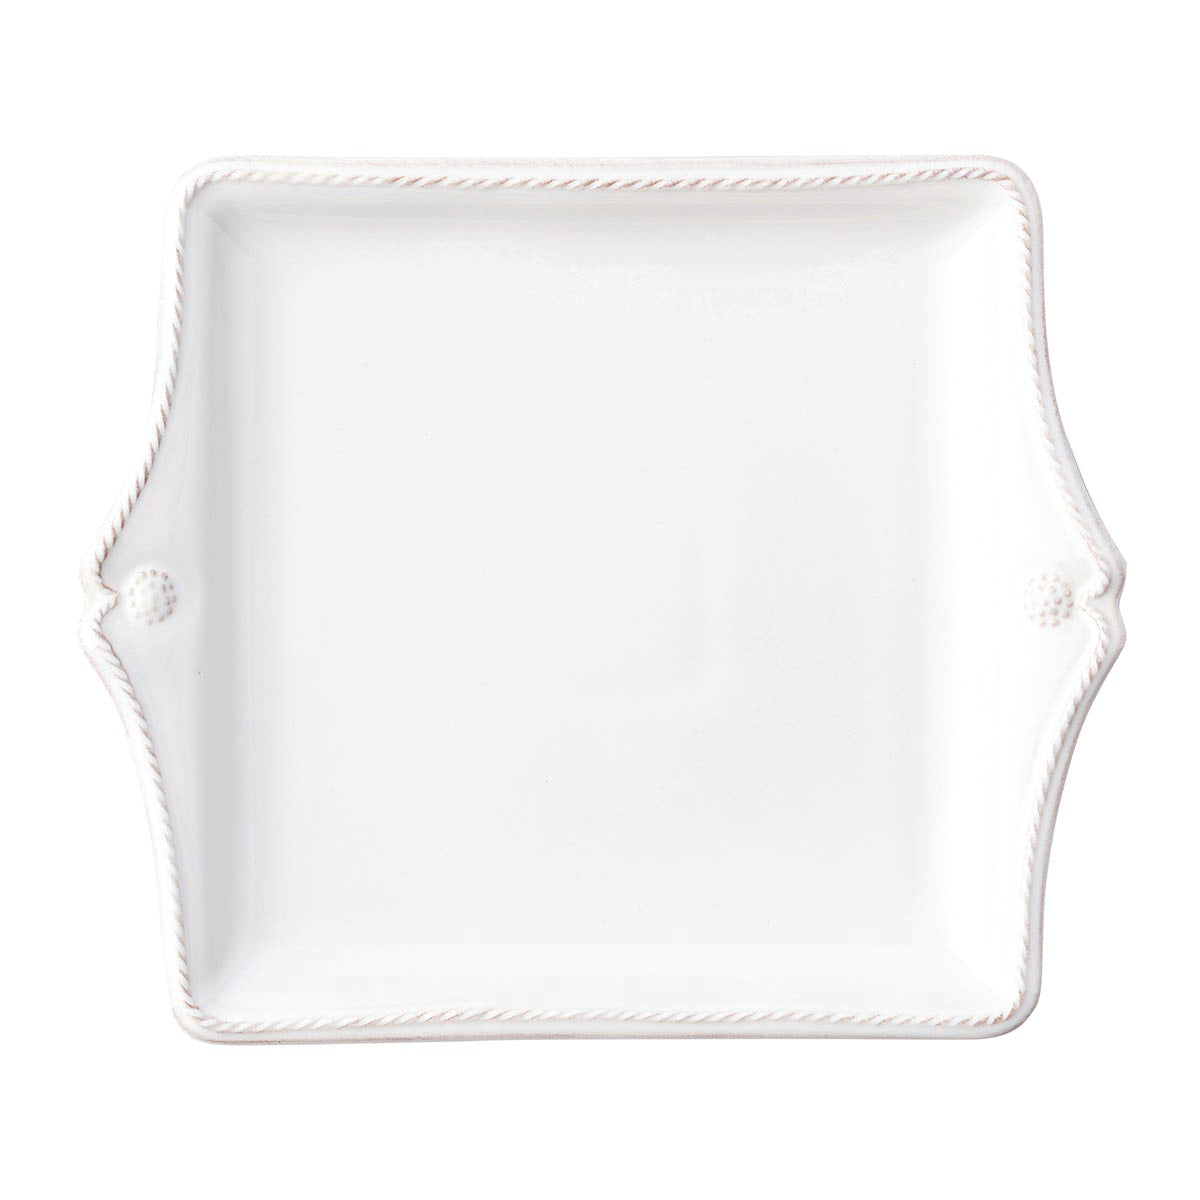 Berry & Thread Sweets Tray - Whitewash